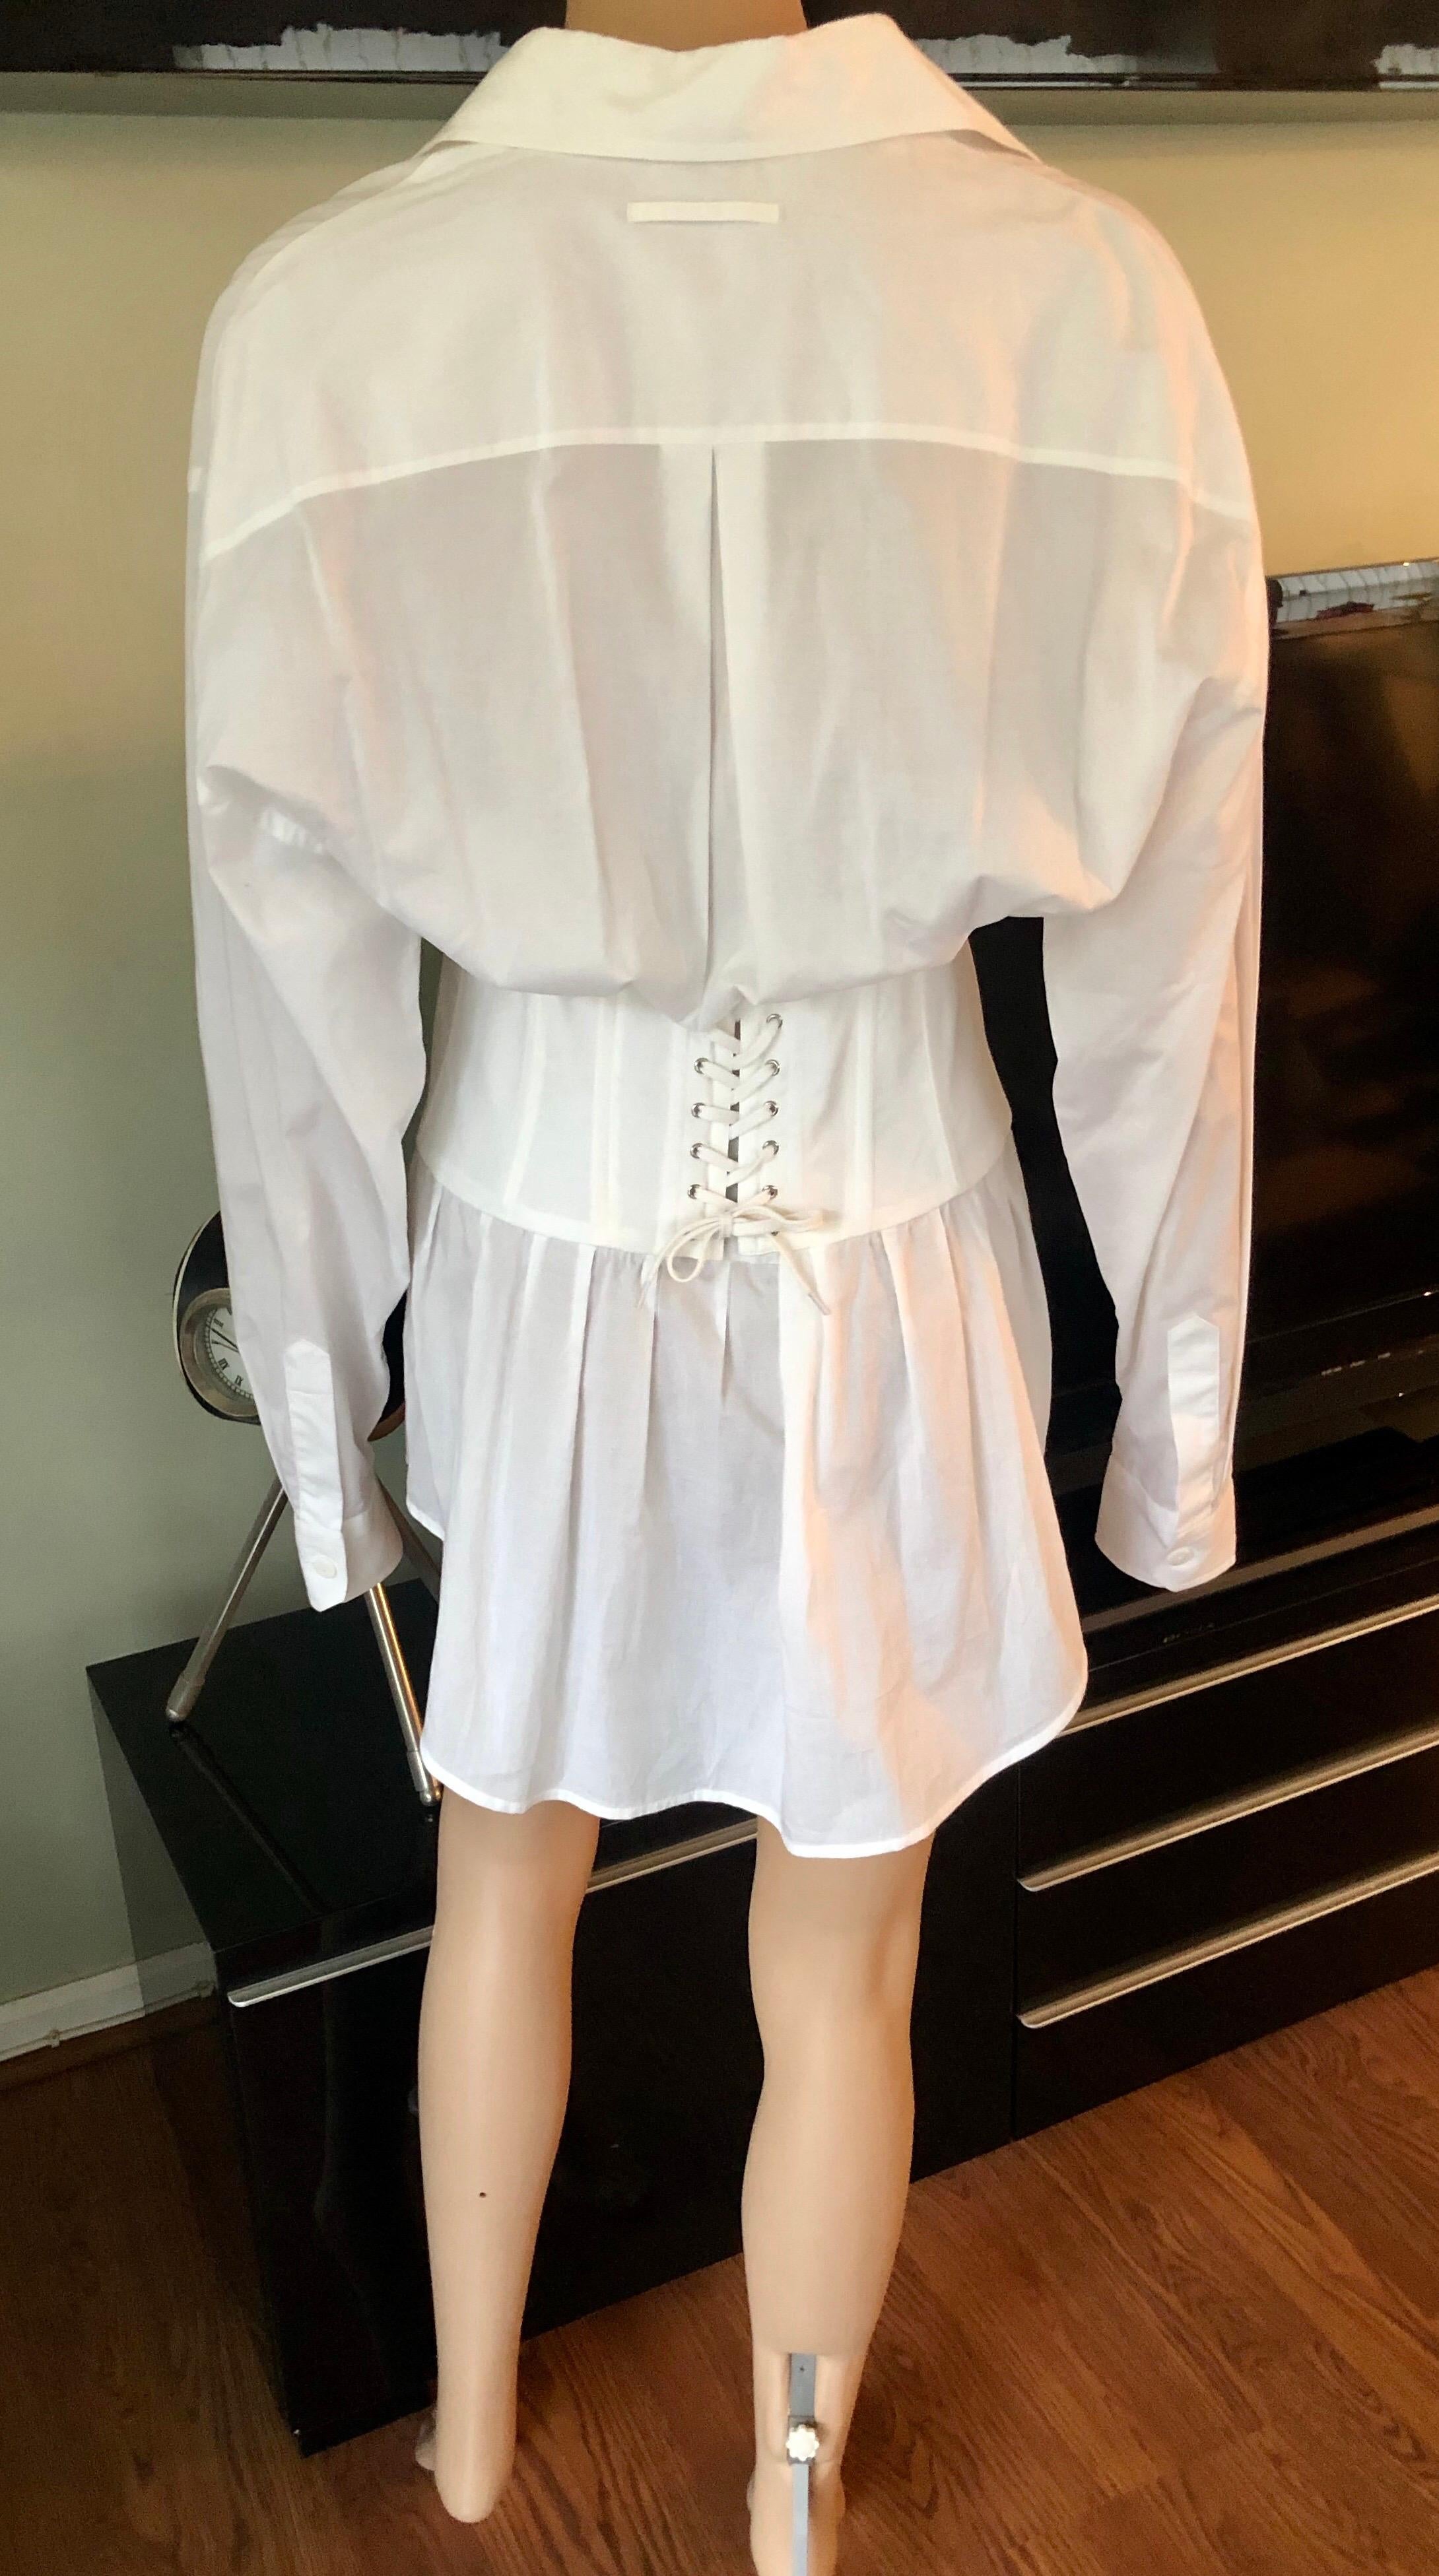 Jean Paul Gaultier Vintage Corset White Shirt Dress IT 44

Jean Paul Gaultier Vintage white cotton blend corset detailed shirt dress featuring a spread collar, a front button fastening, long sleeves and a mini length.

